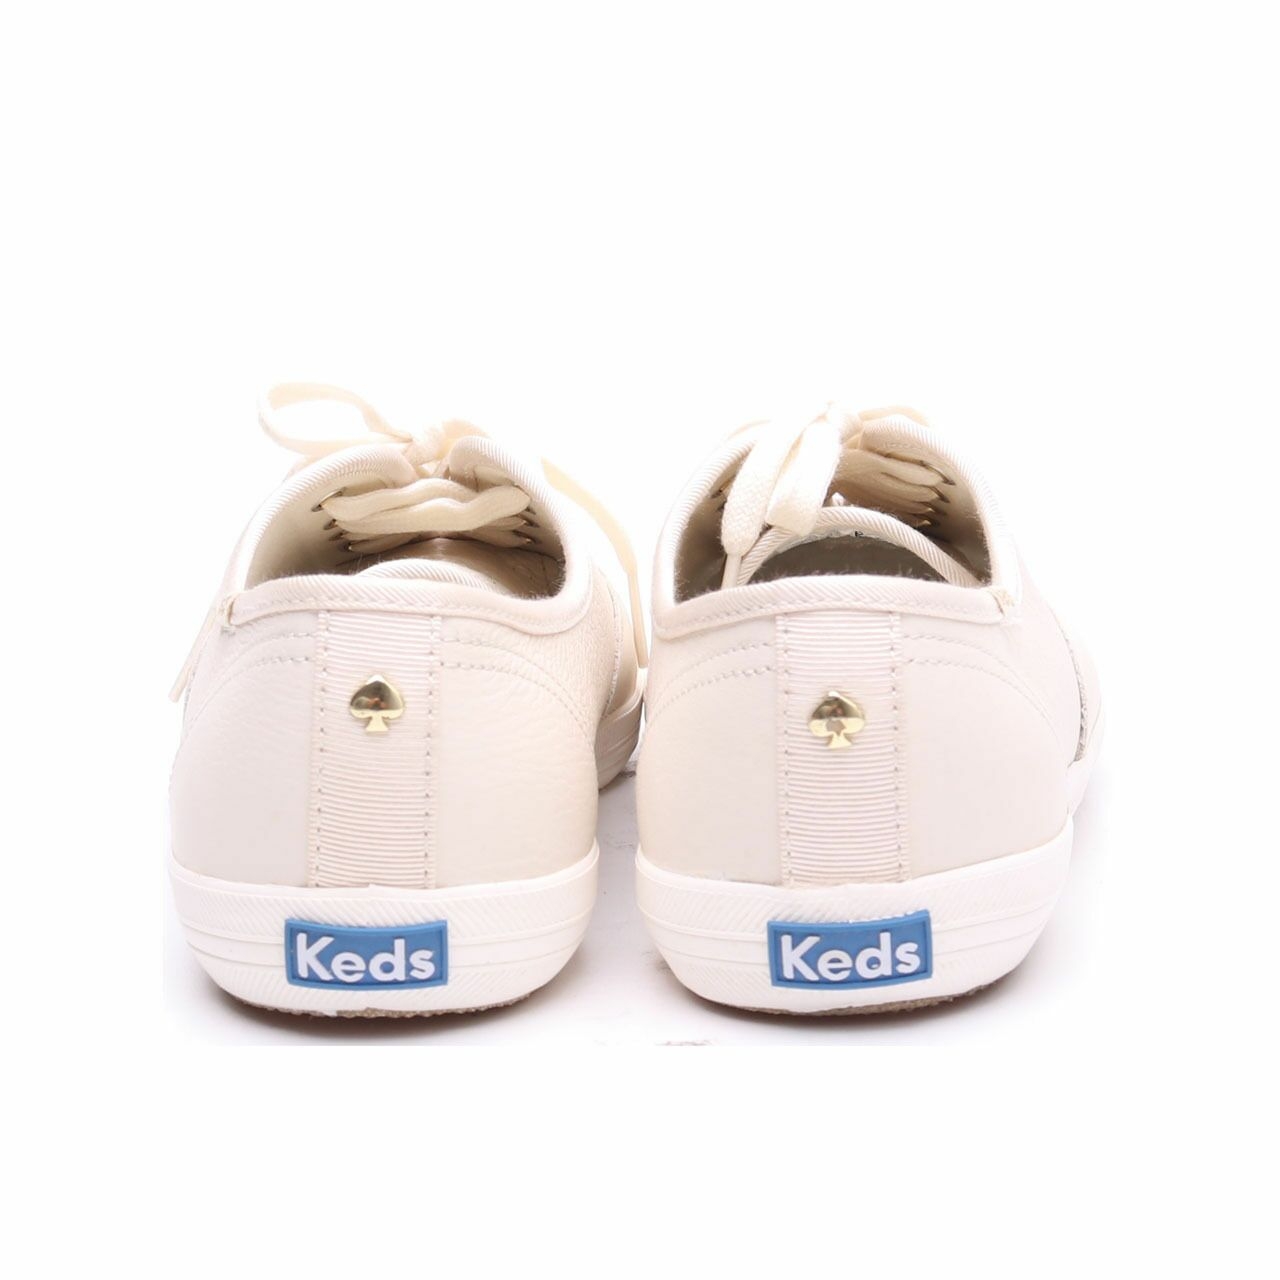 Keds For Kate Spade Cream Leather Sneakers